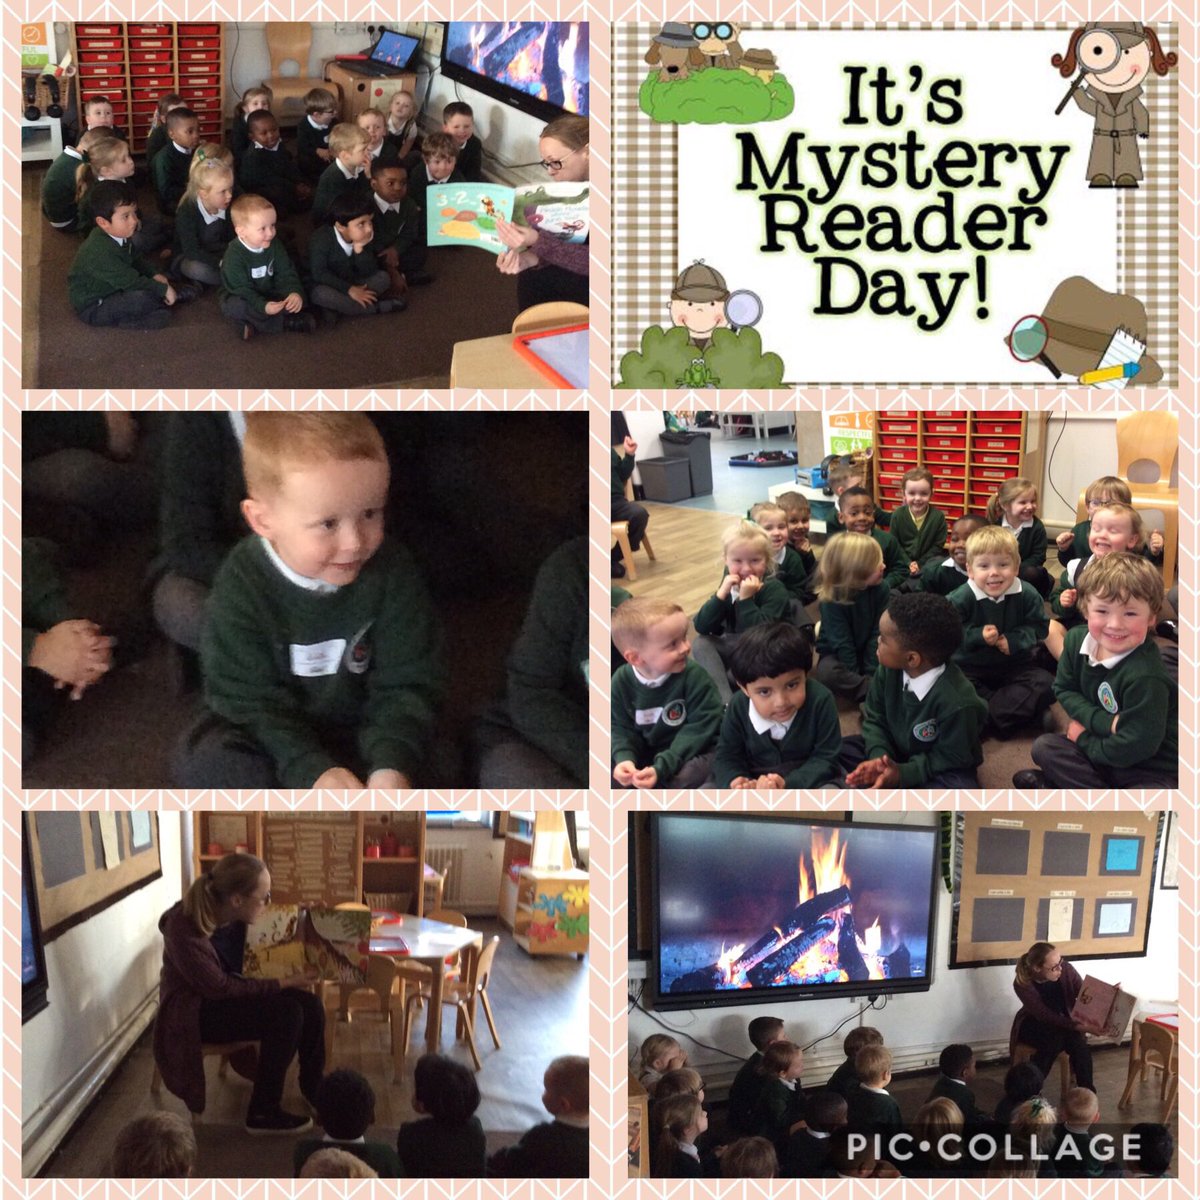 Today we welcomed our first mystery reader to end our day. Rory’s face when he realised it was his mum was priceless. Thank you to Mrs McIlargey, we loved listening to your story! #sjsbreading #mysteryreader #Parentalinvolvement